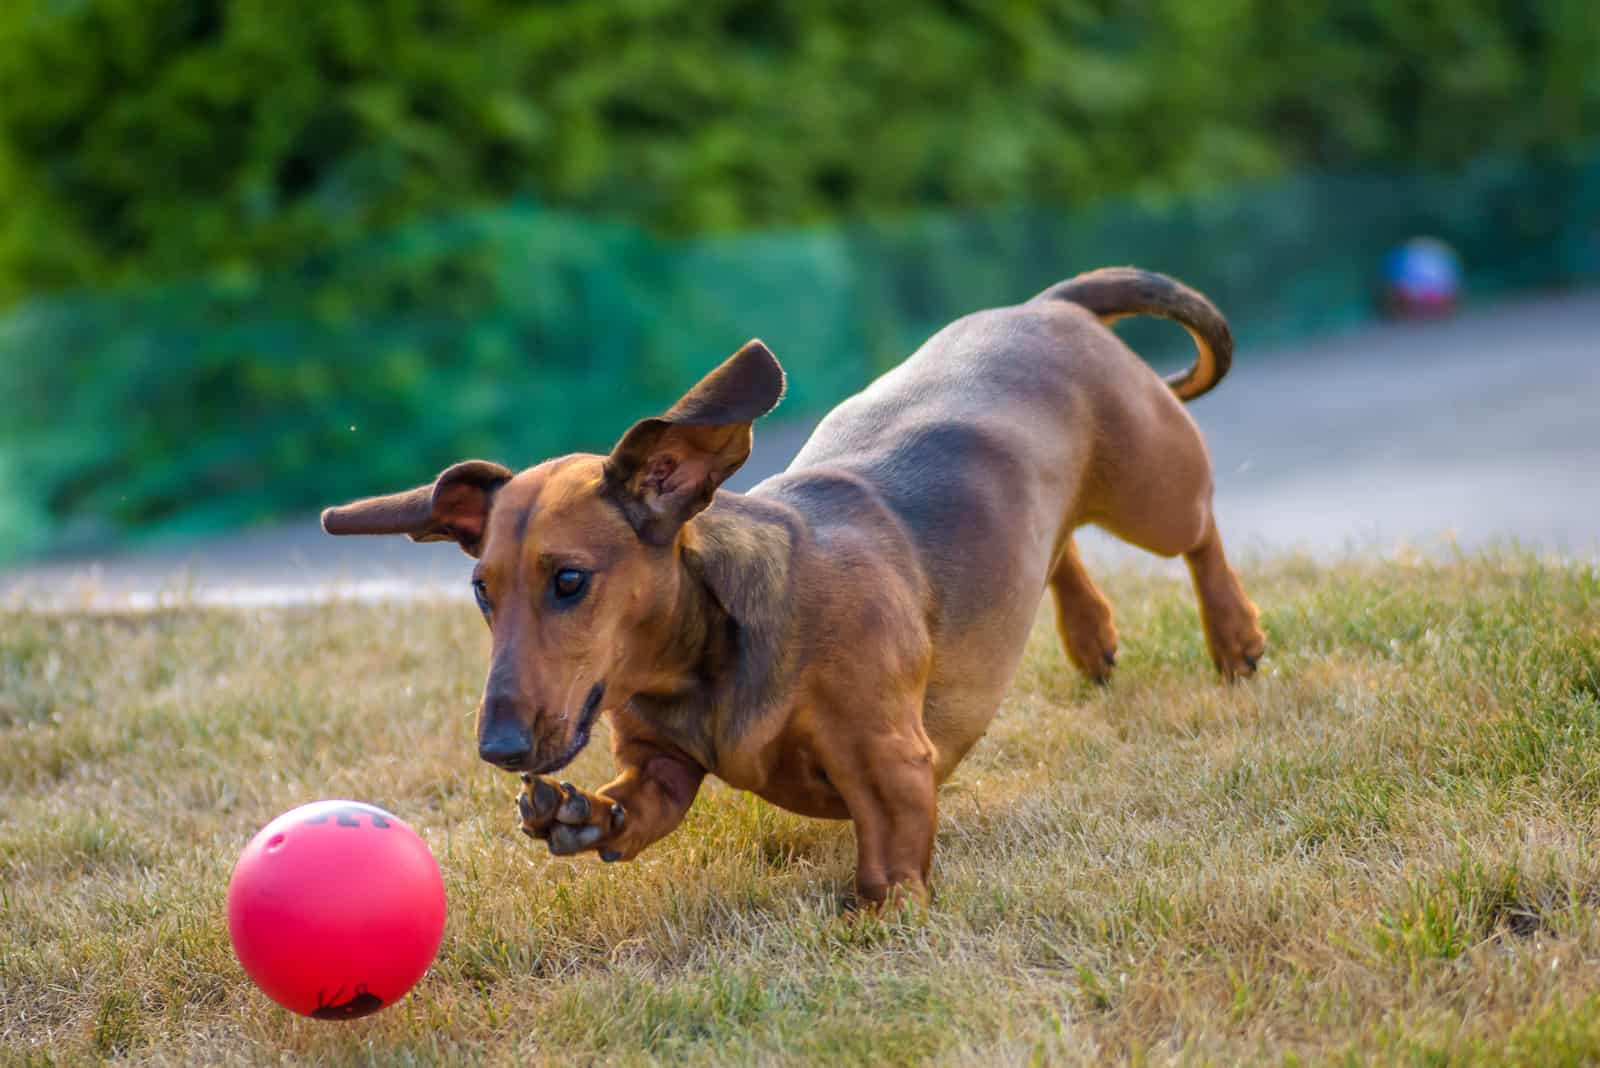 dachshund dog playing with the ball